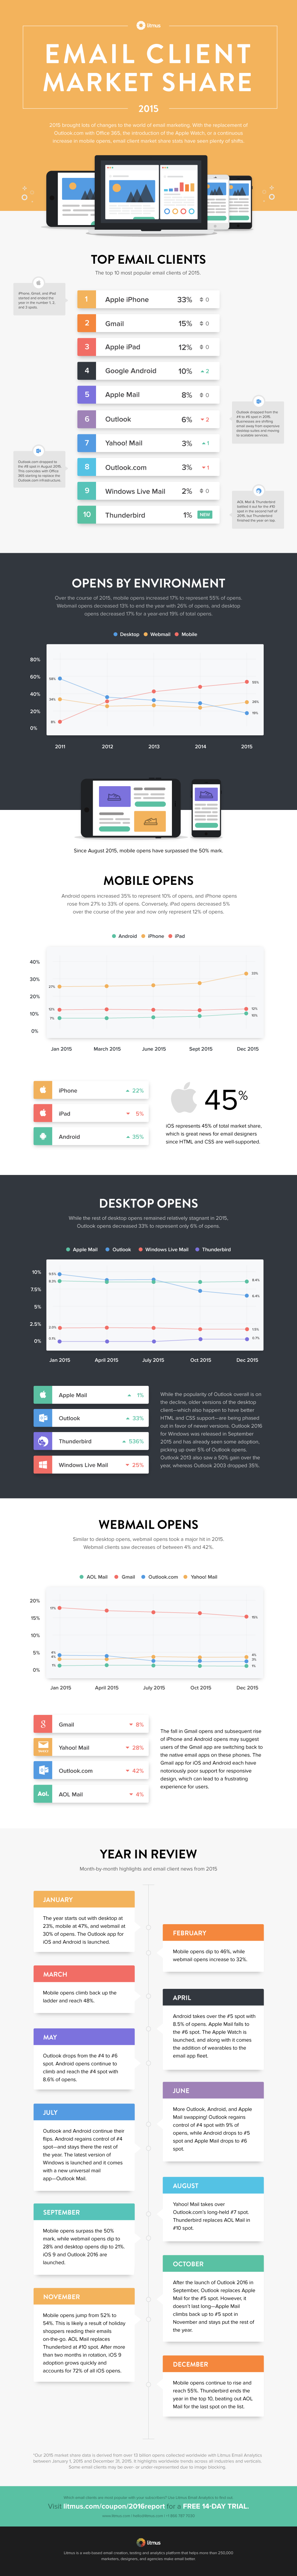 Email_Client_Market_Share_Infographic